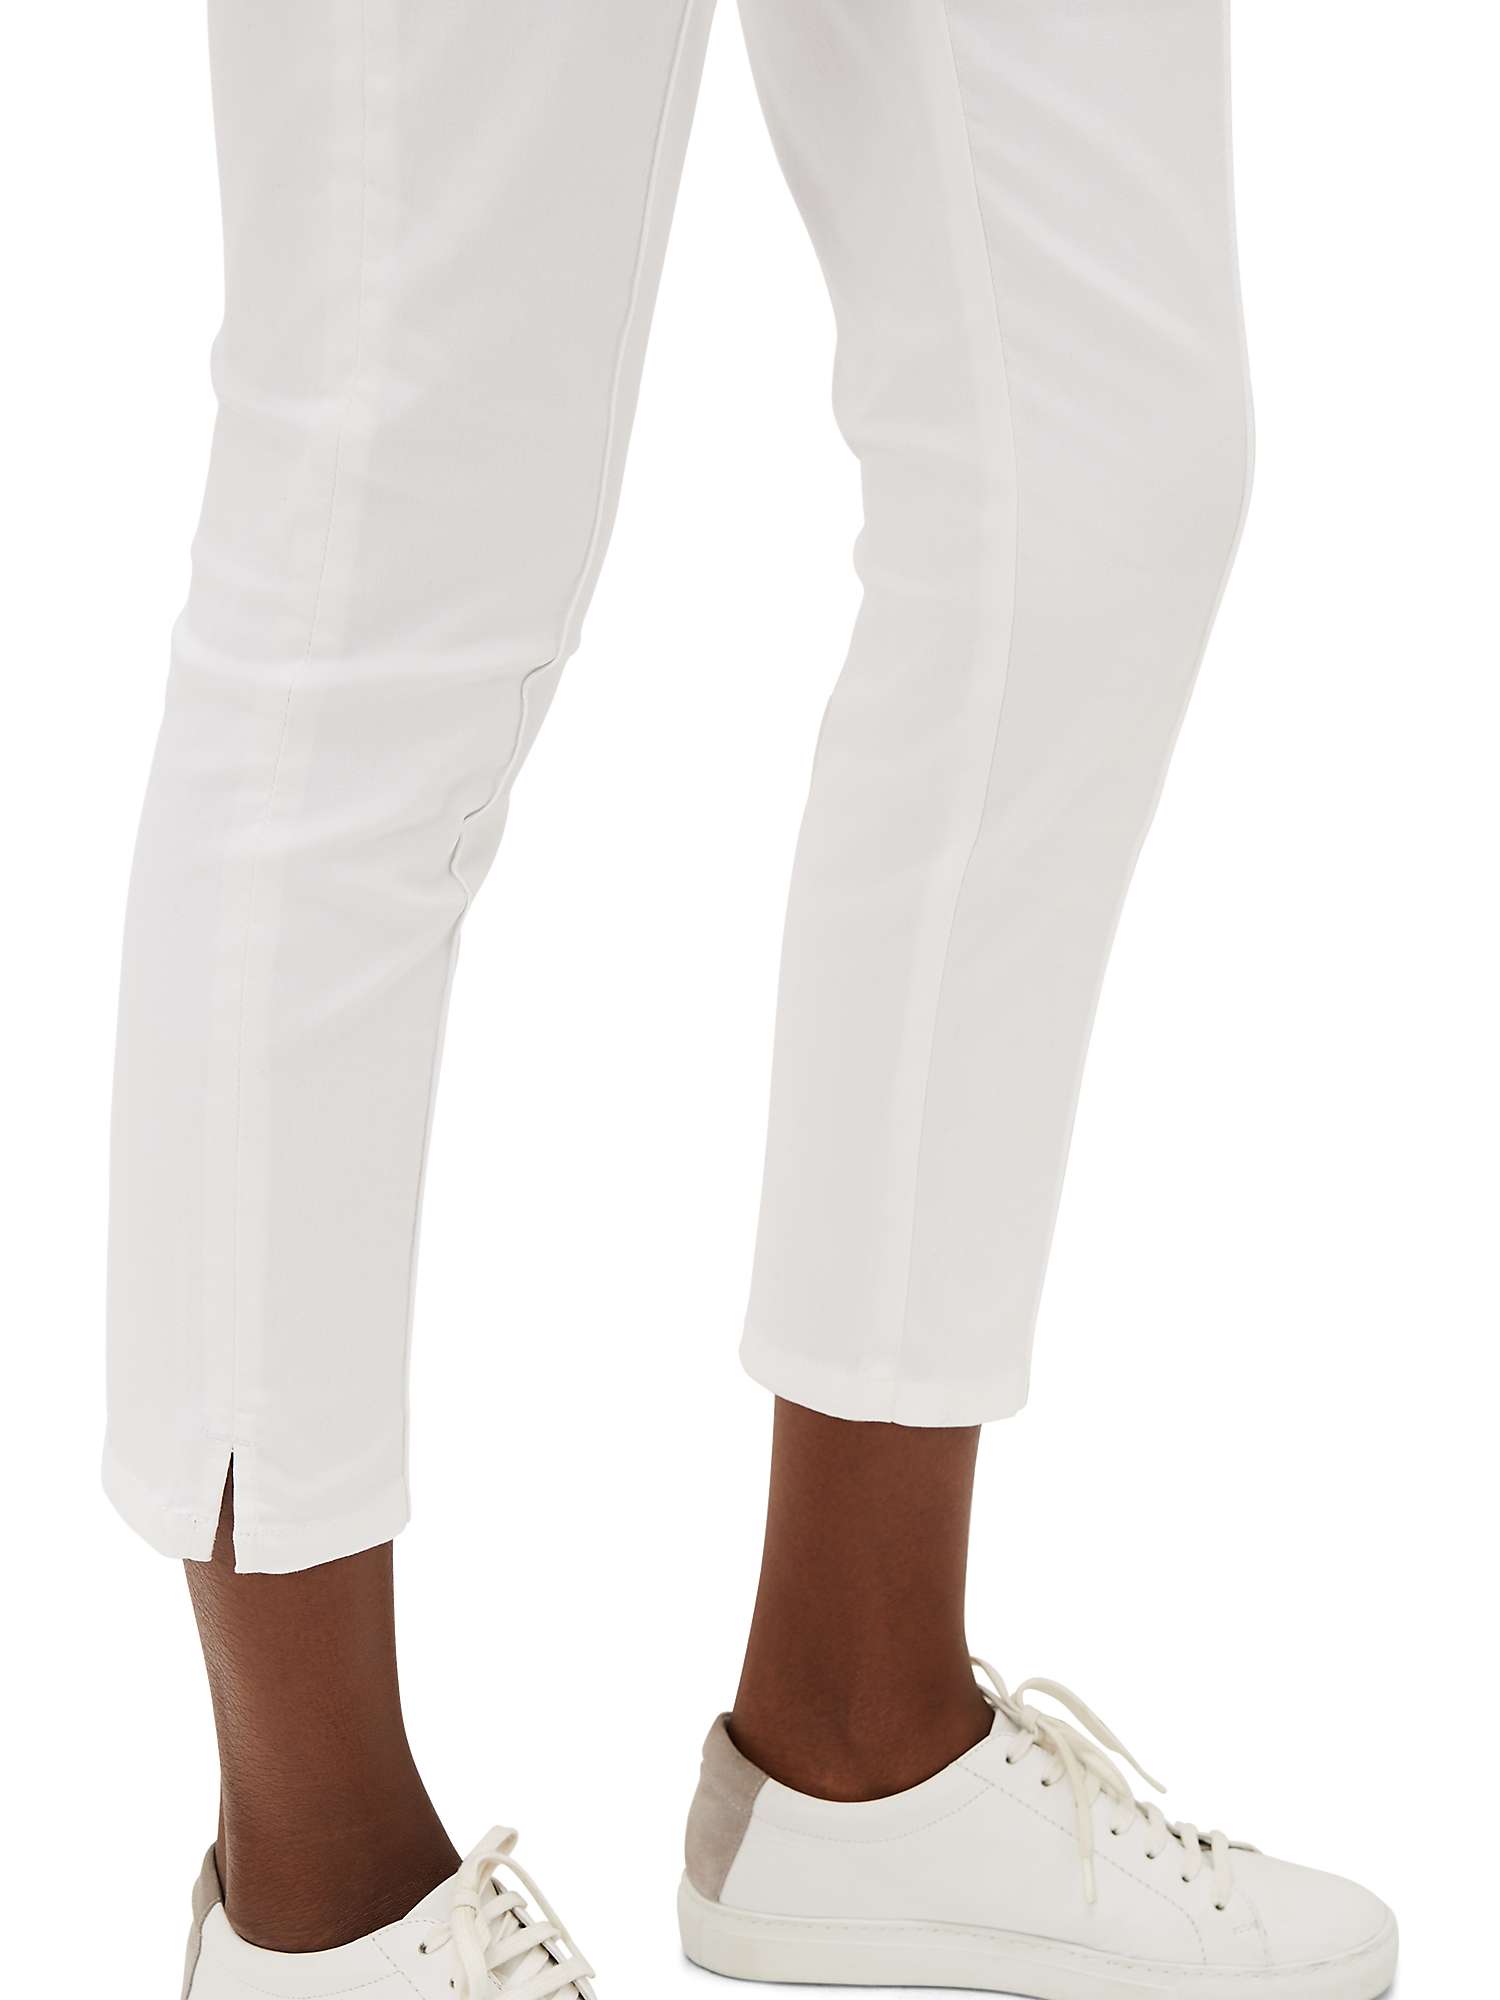 Buy Phase Eight Miah Cropped Jeggings Online at johnlewis.com